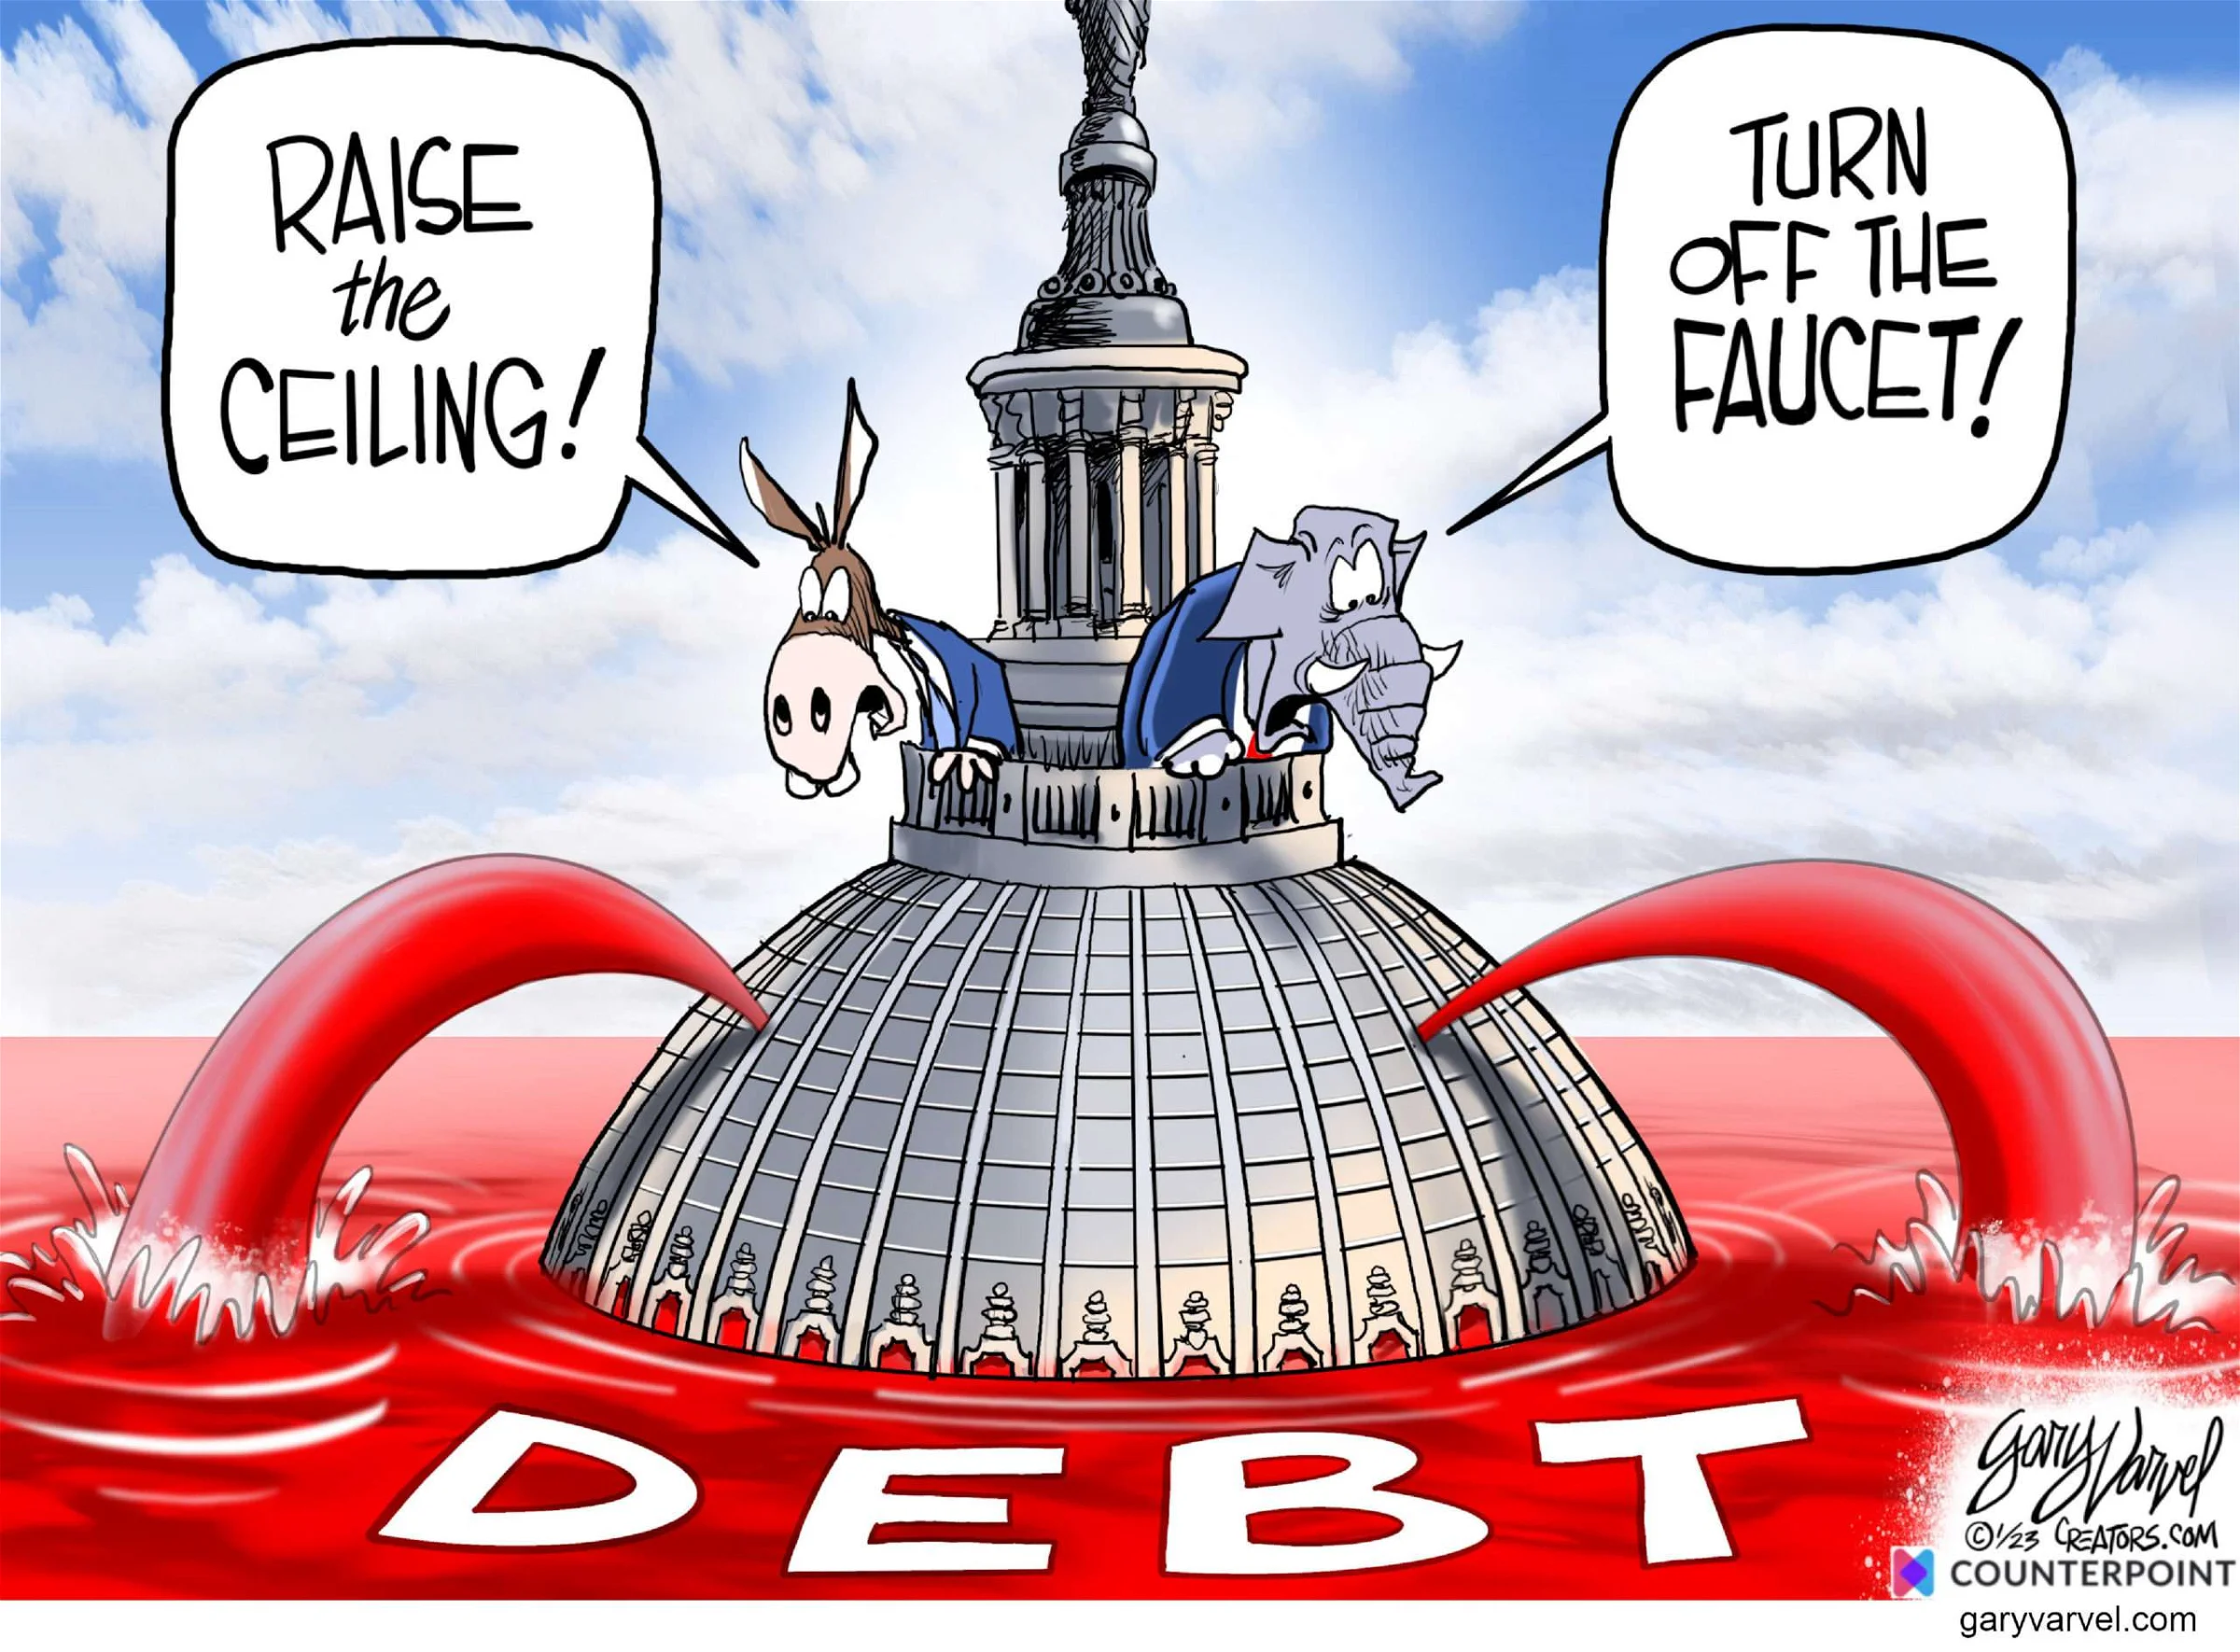 NextImg:‘Outrageous’: Freedom Caucus Demands McCarthy Hold The Line On Debt Ceiling Talks